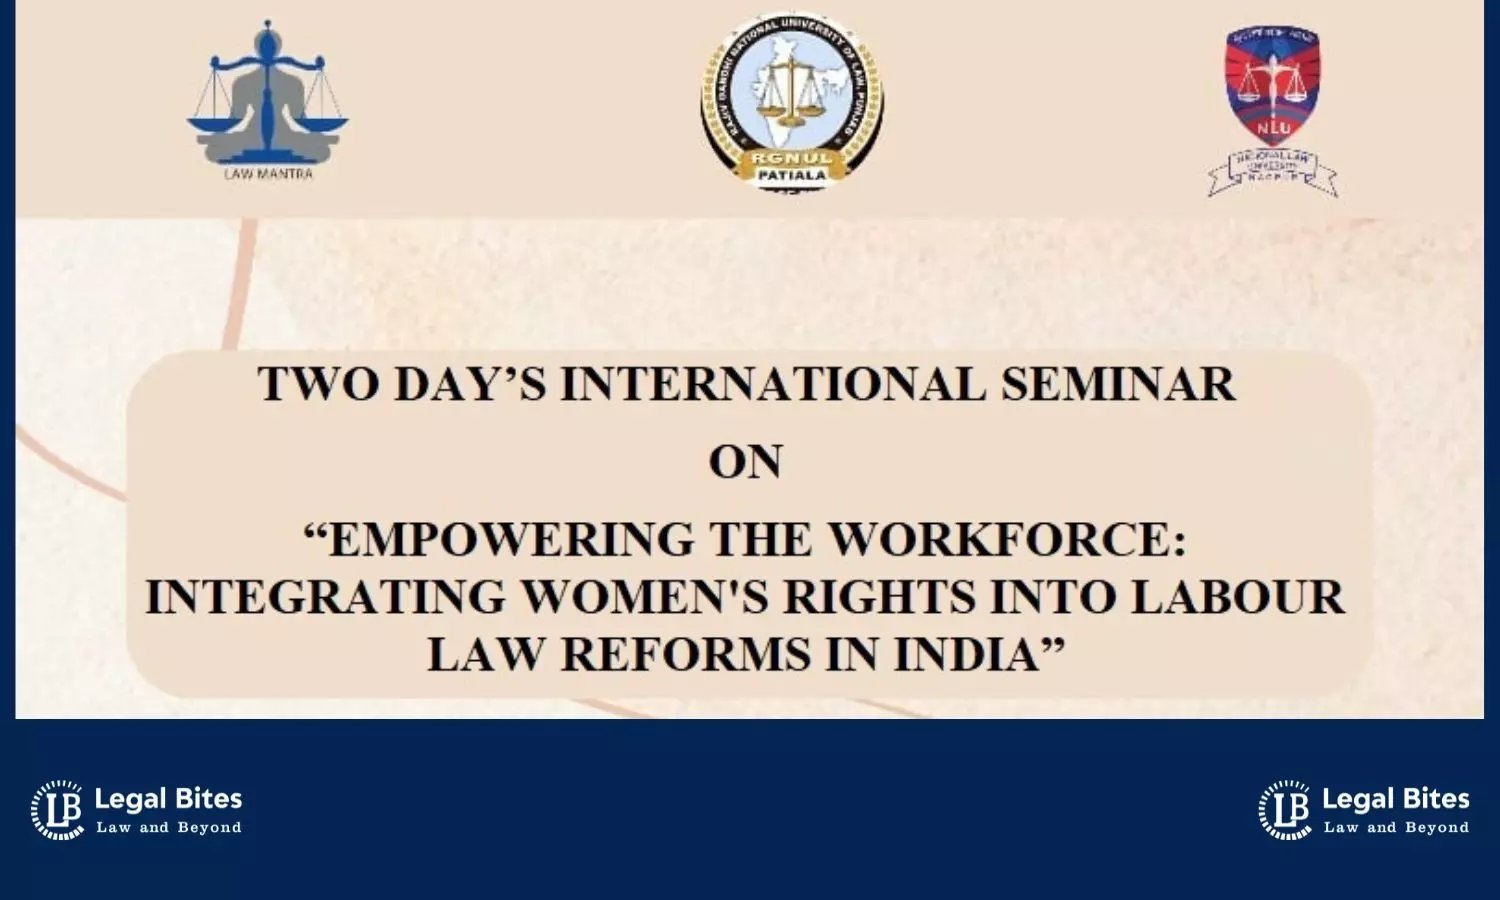 Two Day’s International Seminar on “Empowering the Workforce